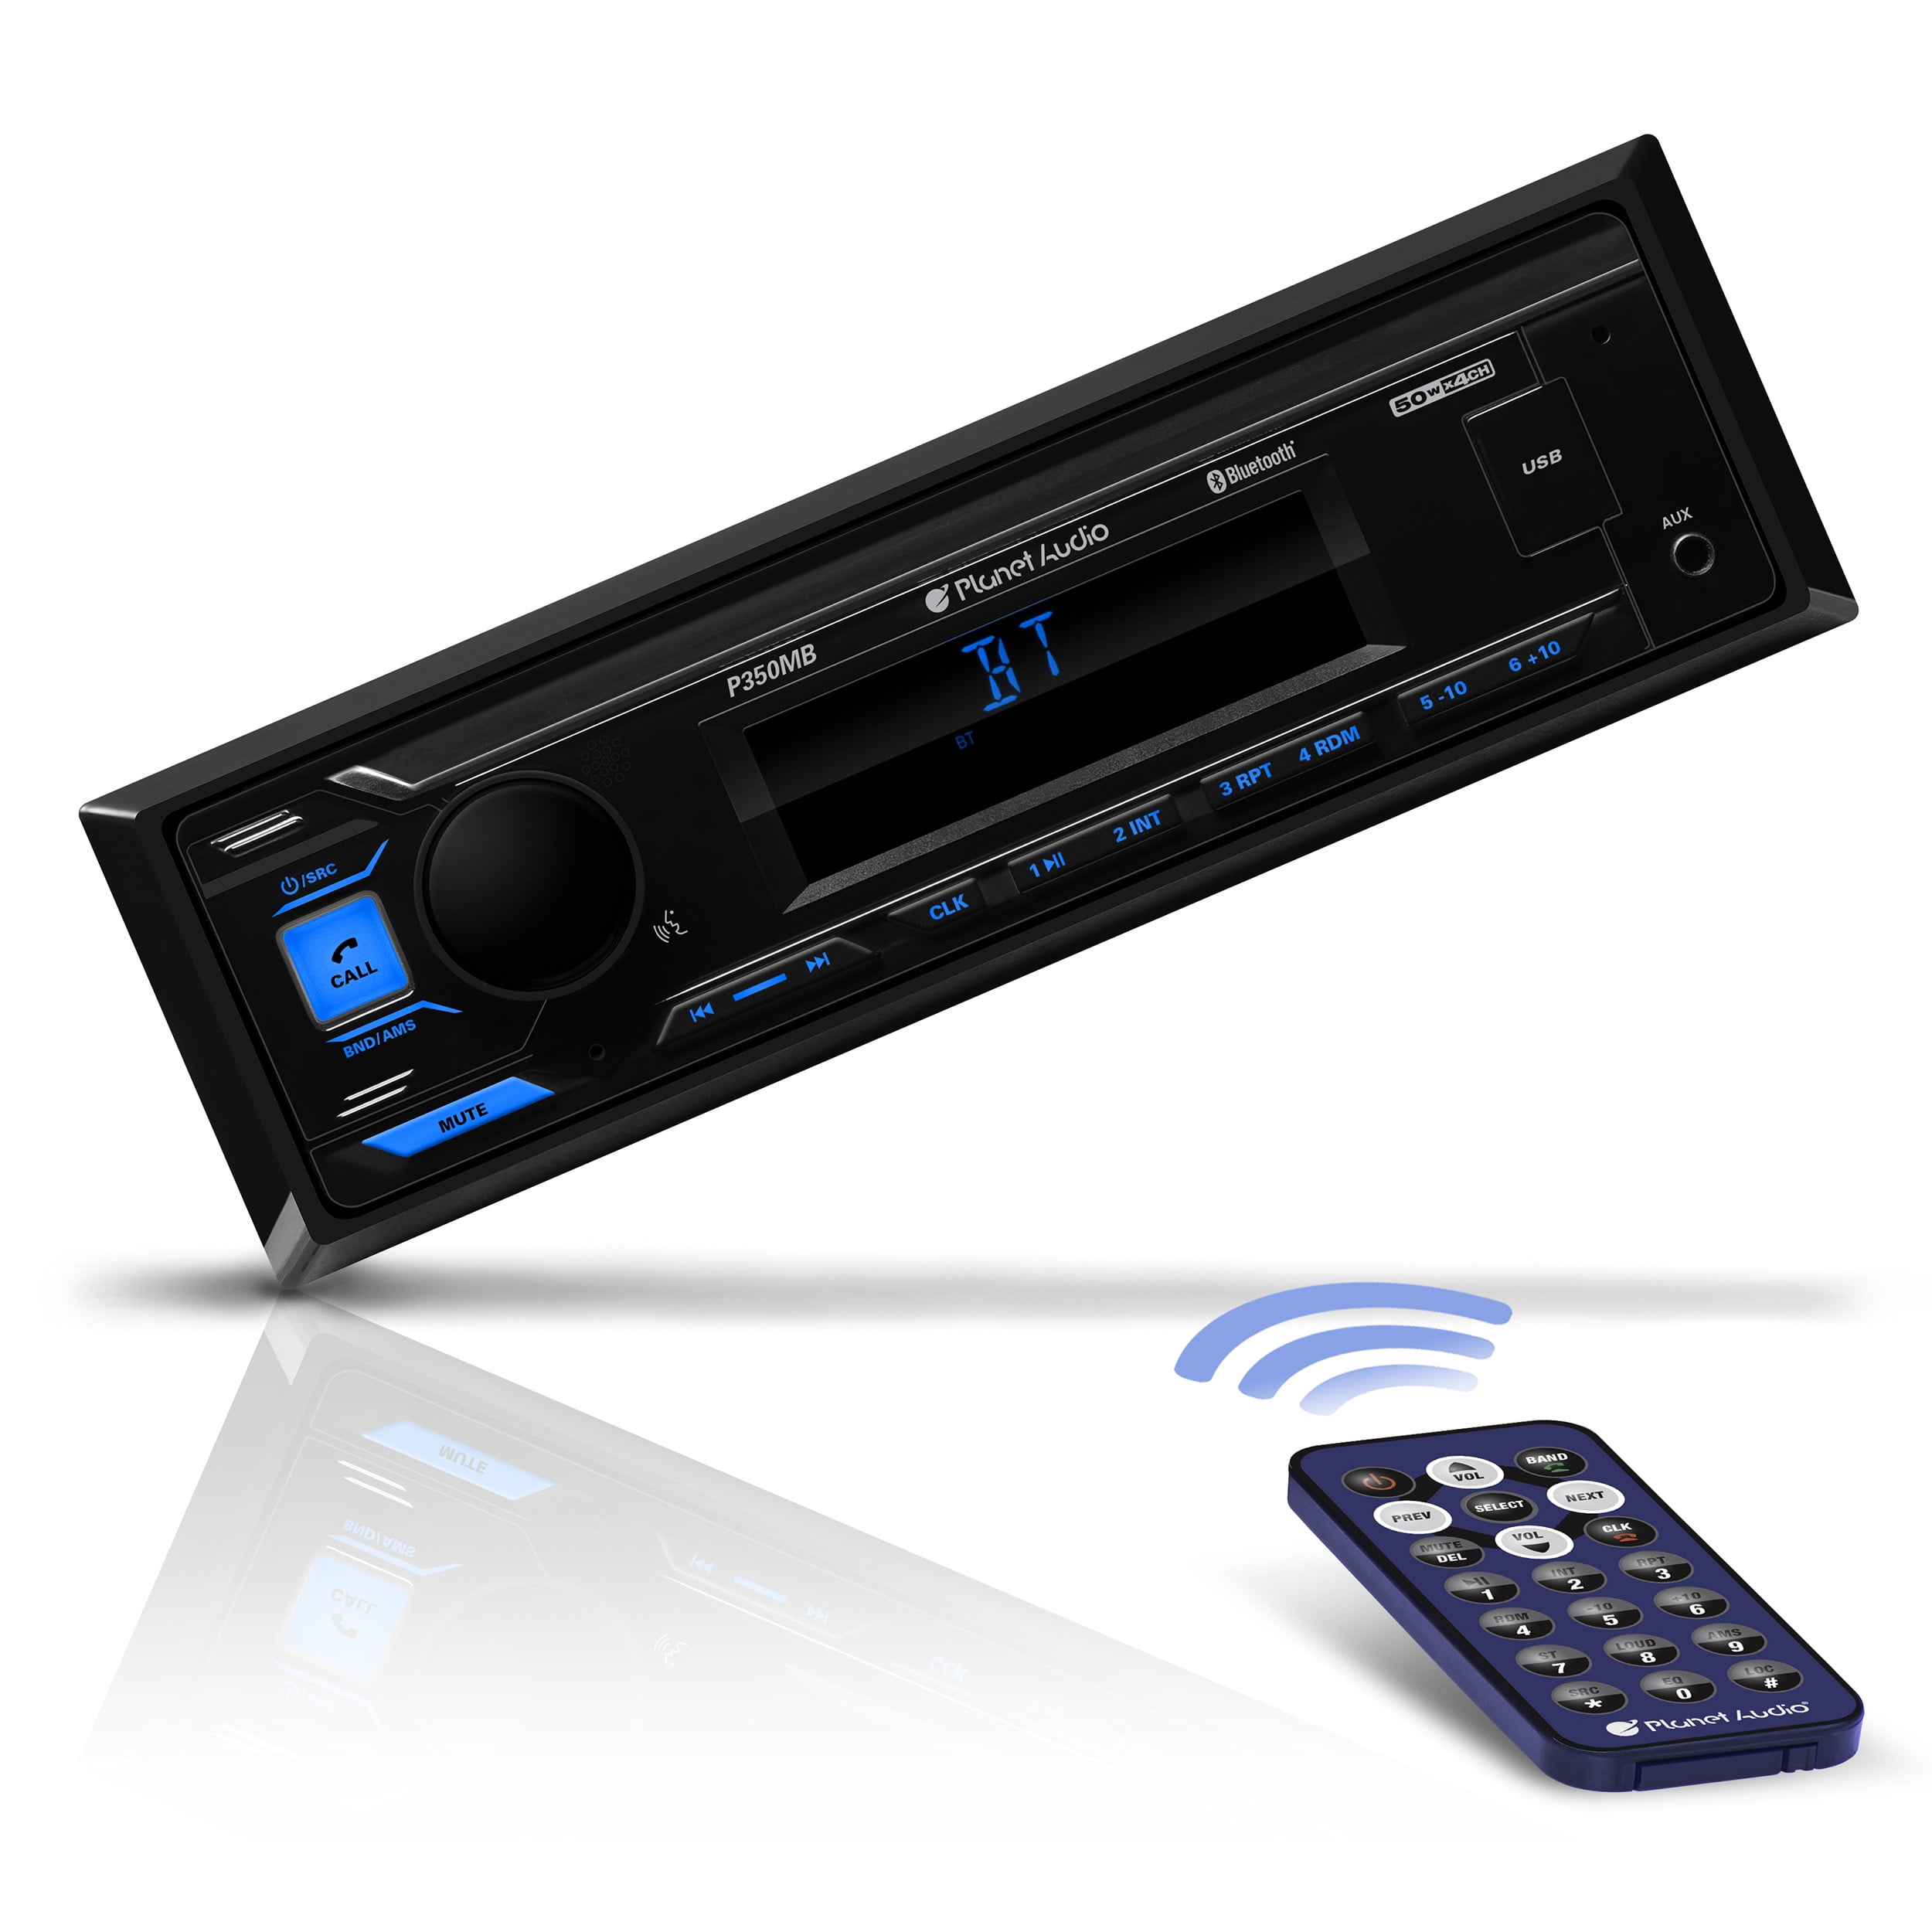  Planet Audio P350MB Car Audio Stereo System - Single Din,  Bluetooth Audio and Hands-Free Calling, MP3, USB Audio, USB Charging, AUX  Input, AM/FM Radio Receiver, No CD Player : Electronics